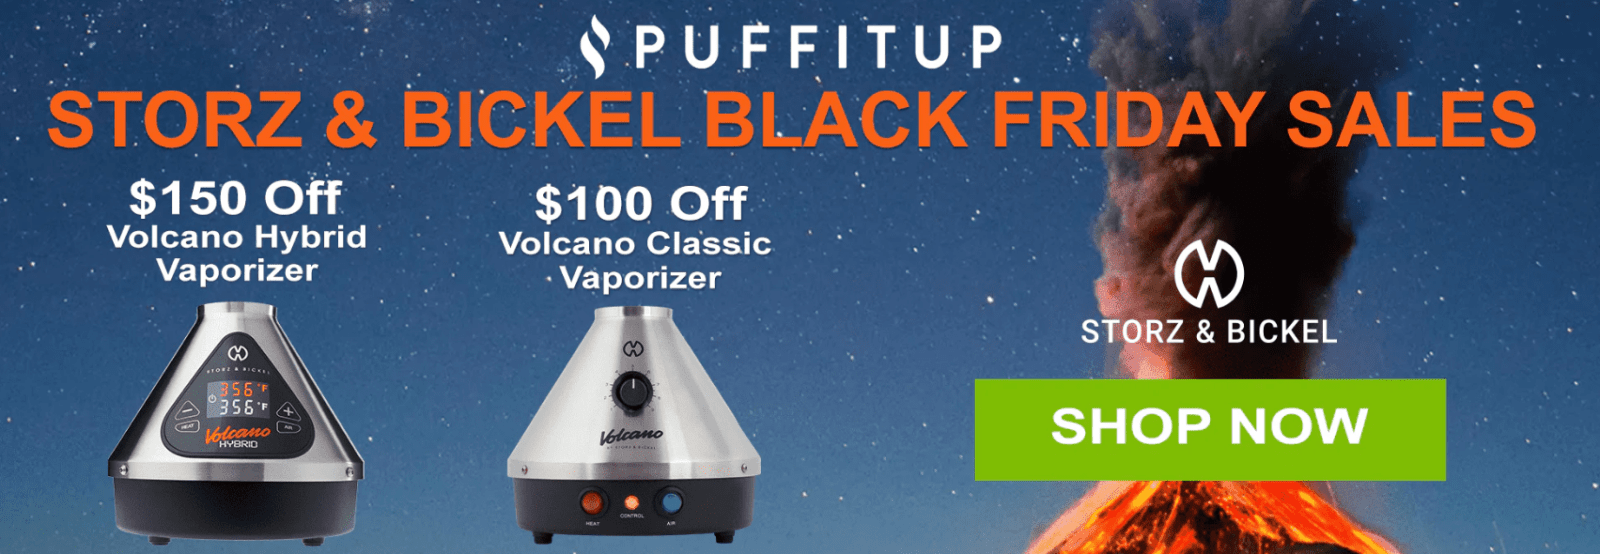 Puffitup Black Friday code: BF25 to save 25%